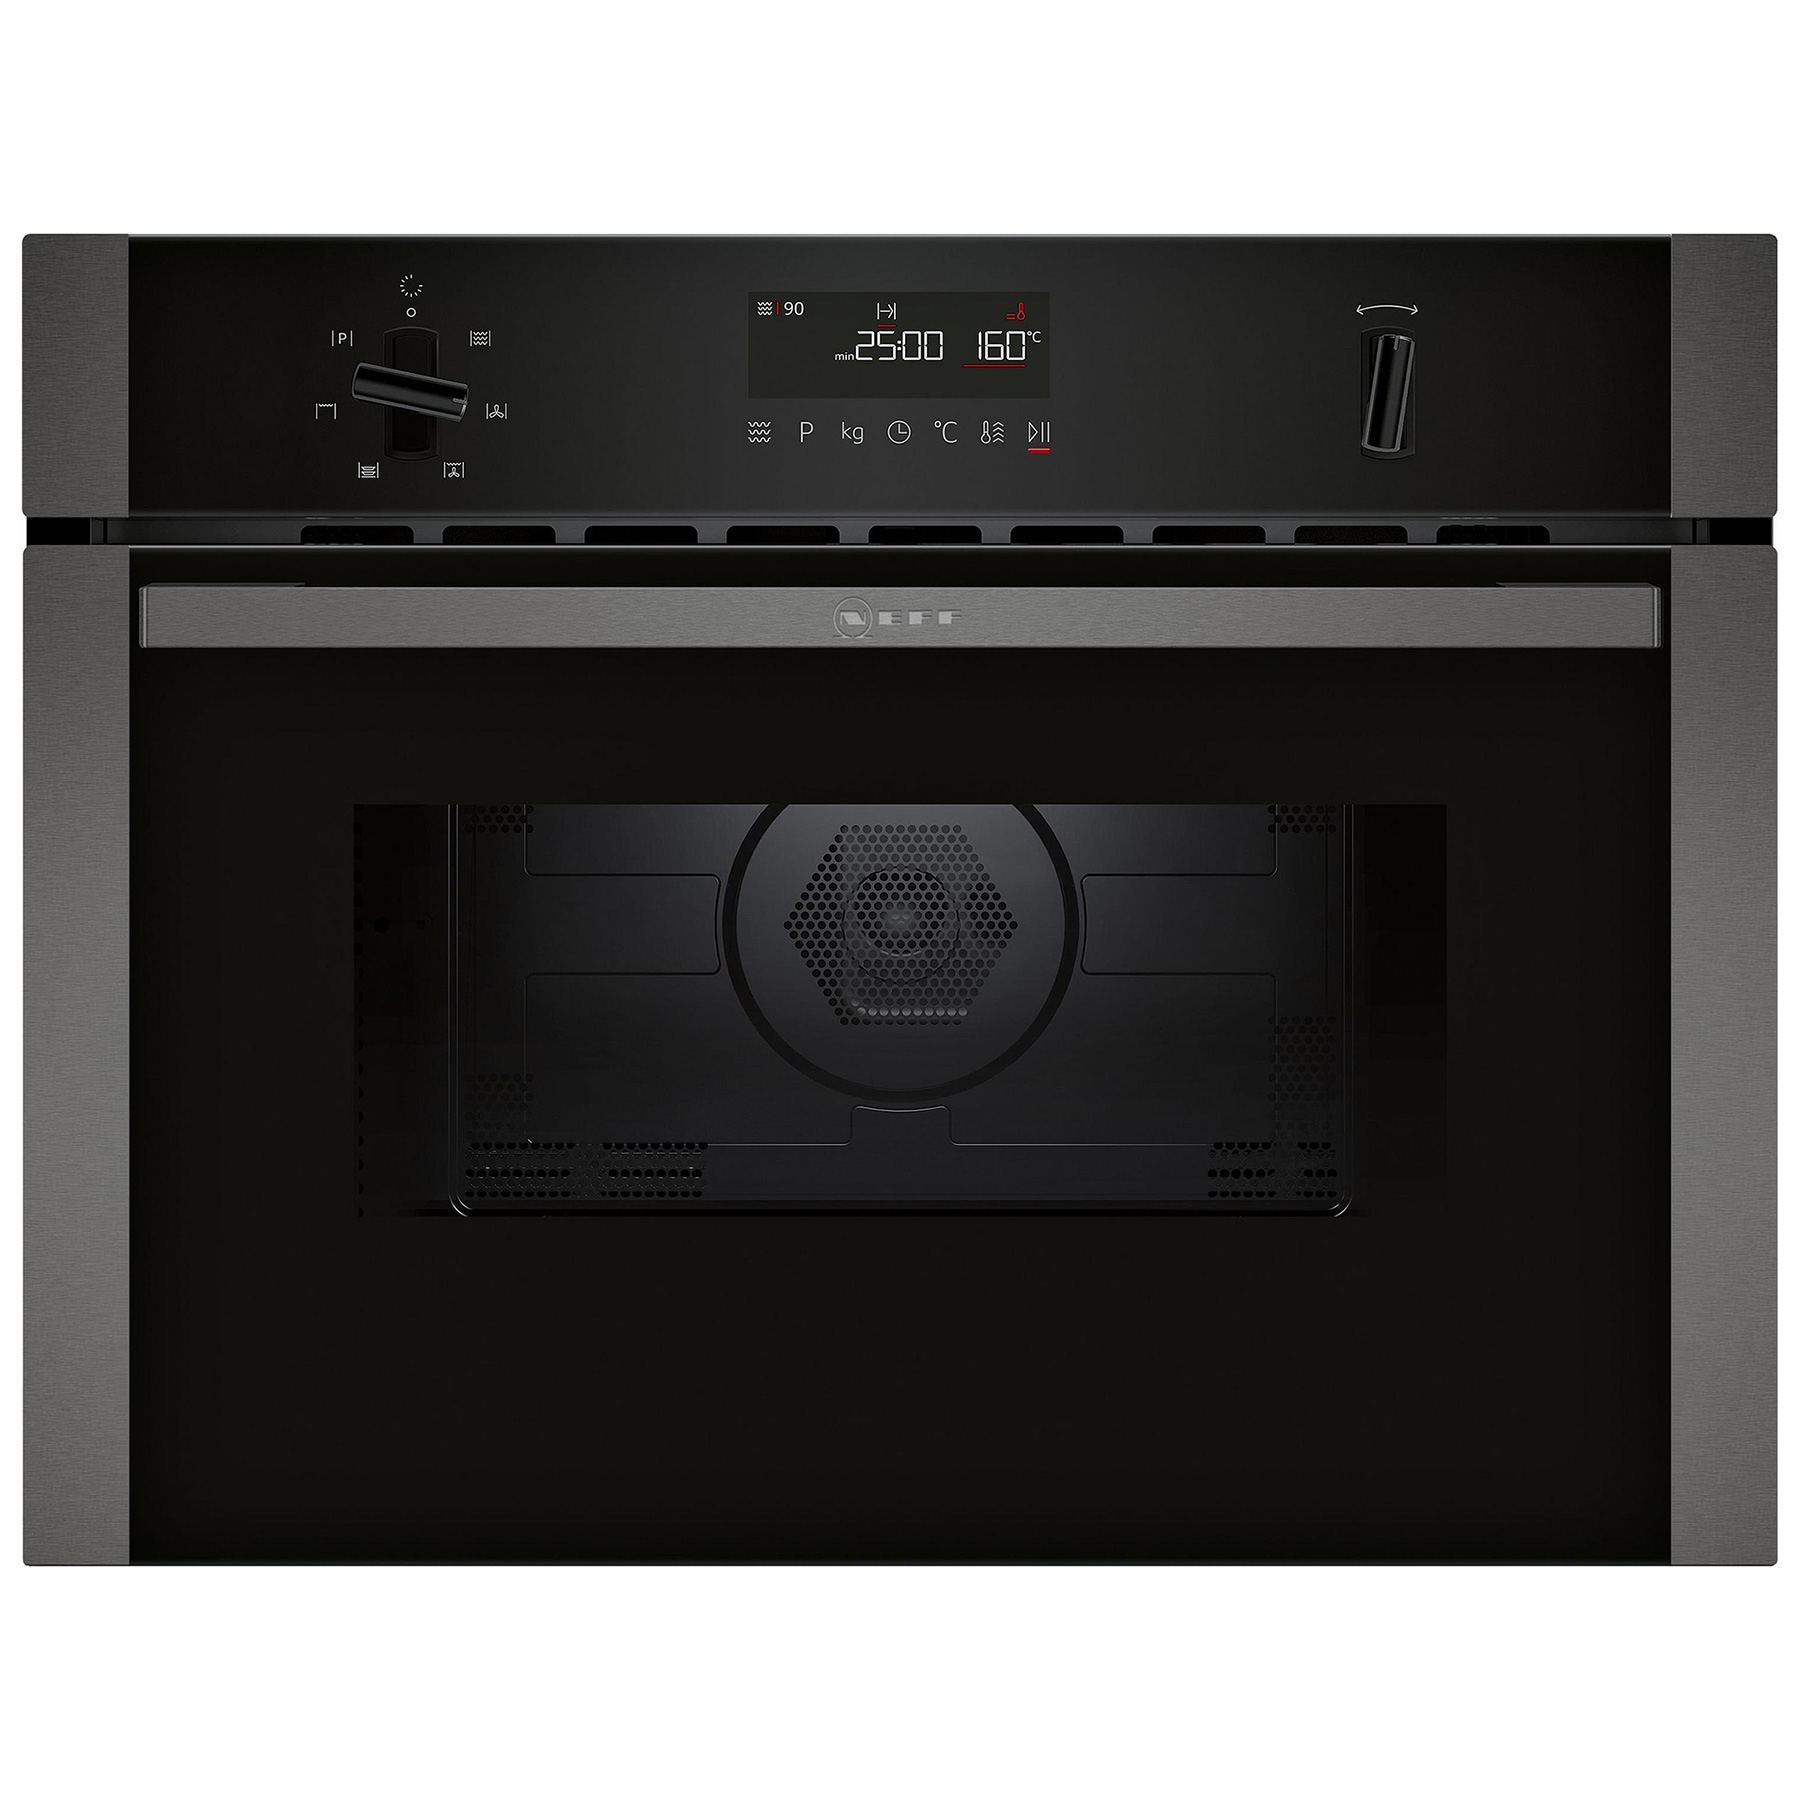 Image of Neff C1AMG84G0B N50 Built In Microwave Oven in Black 900W